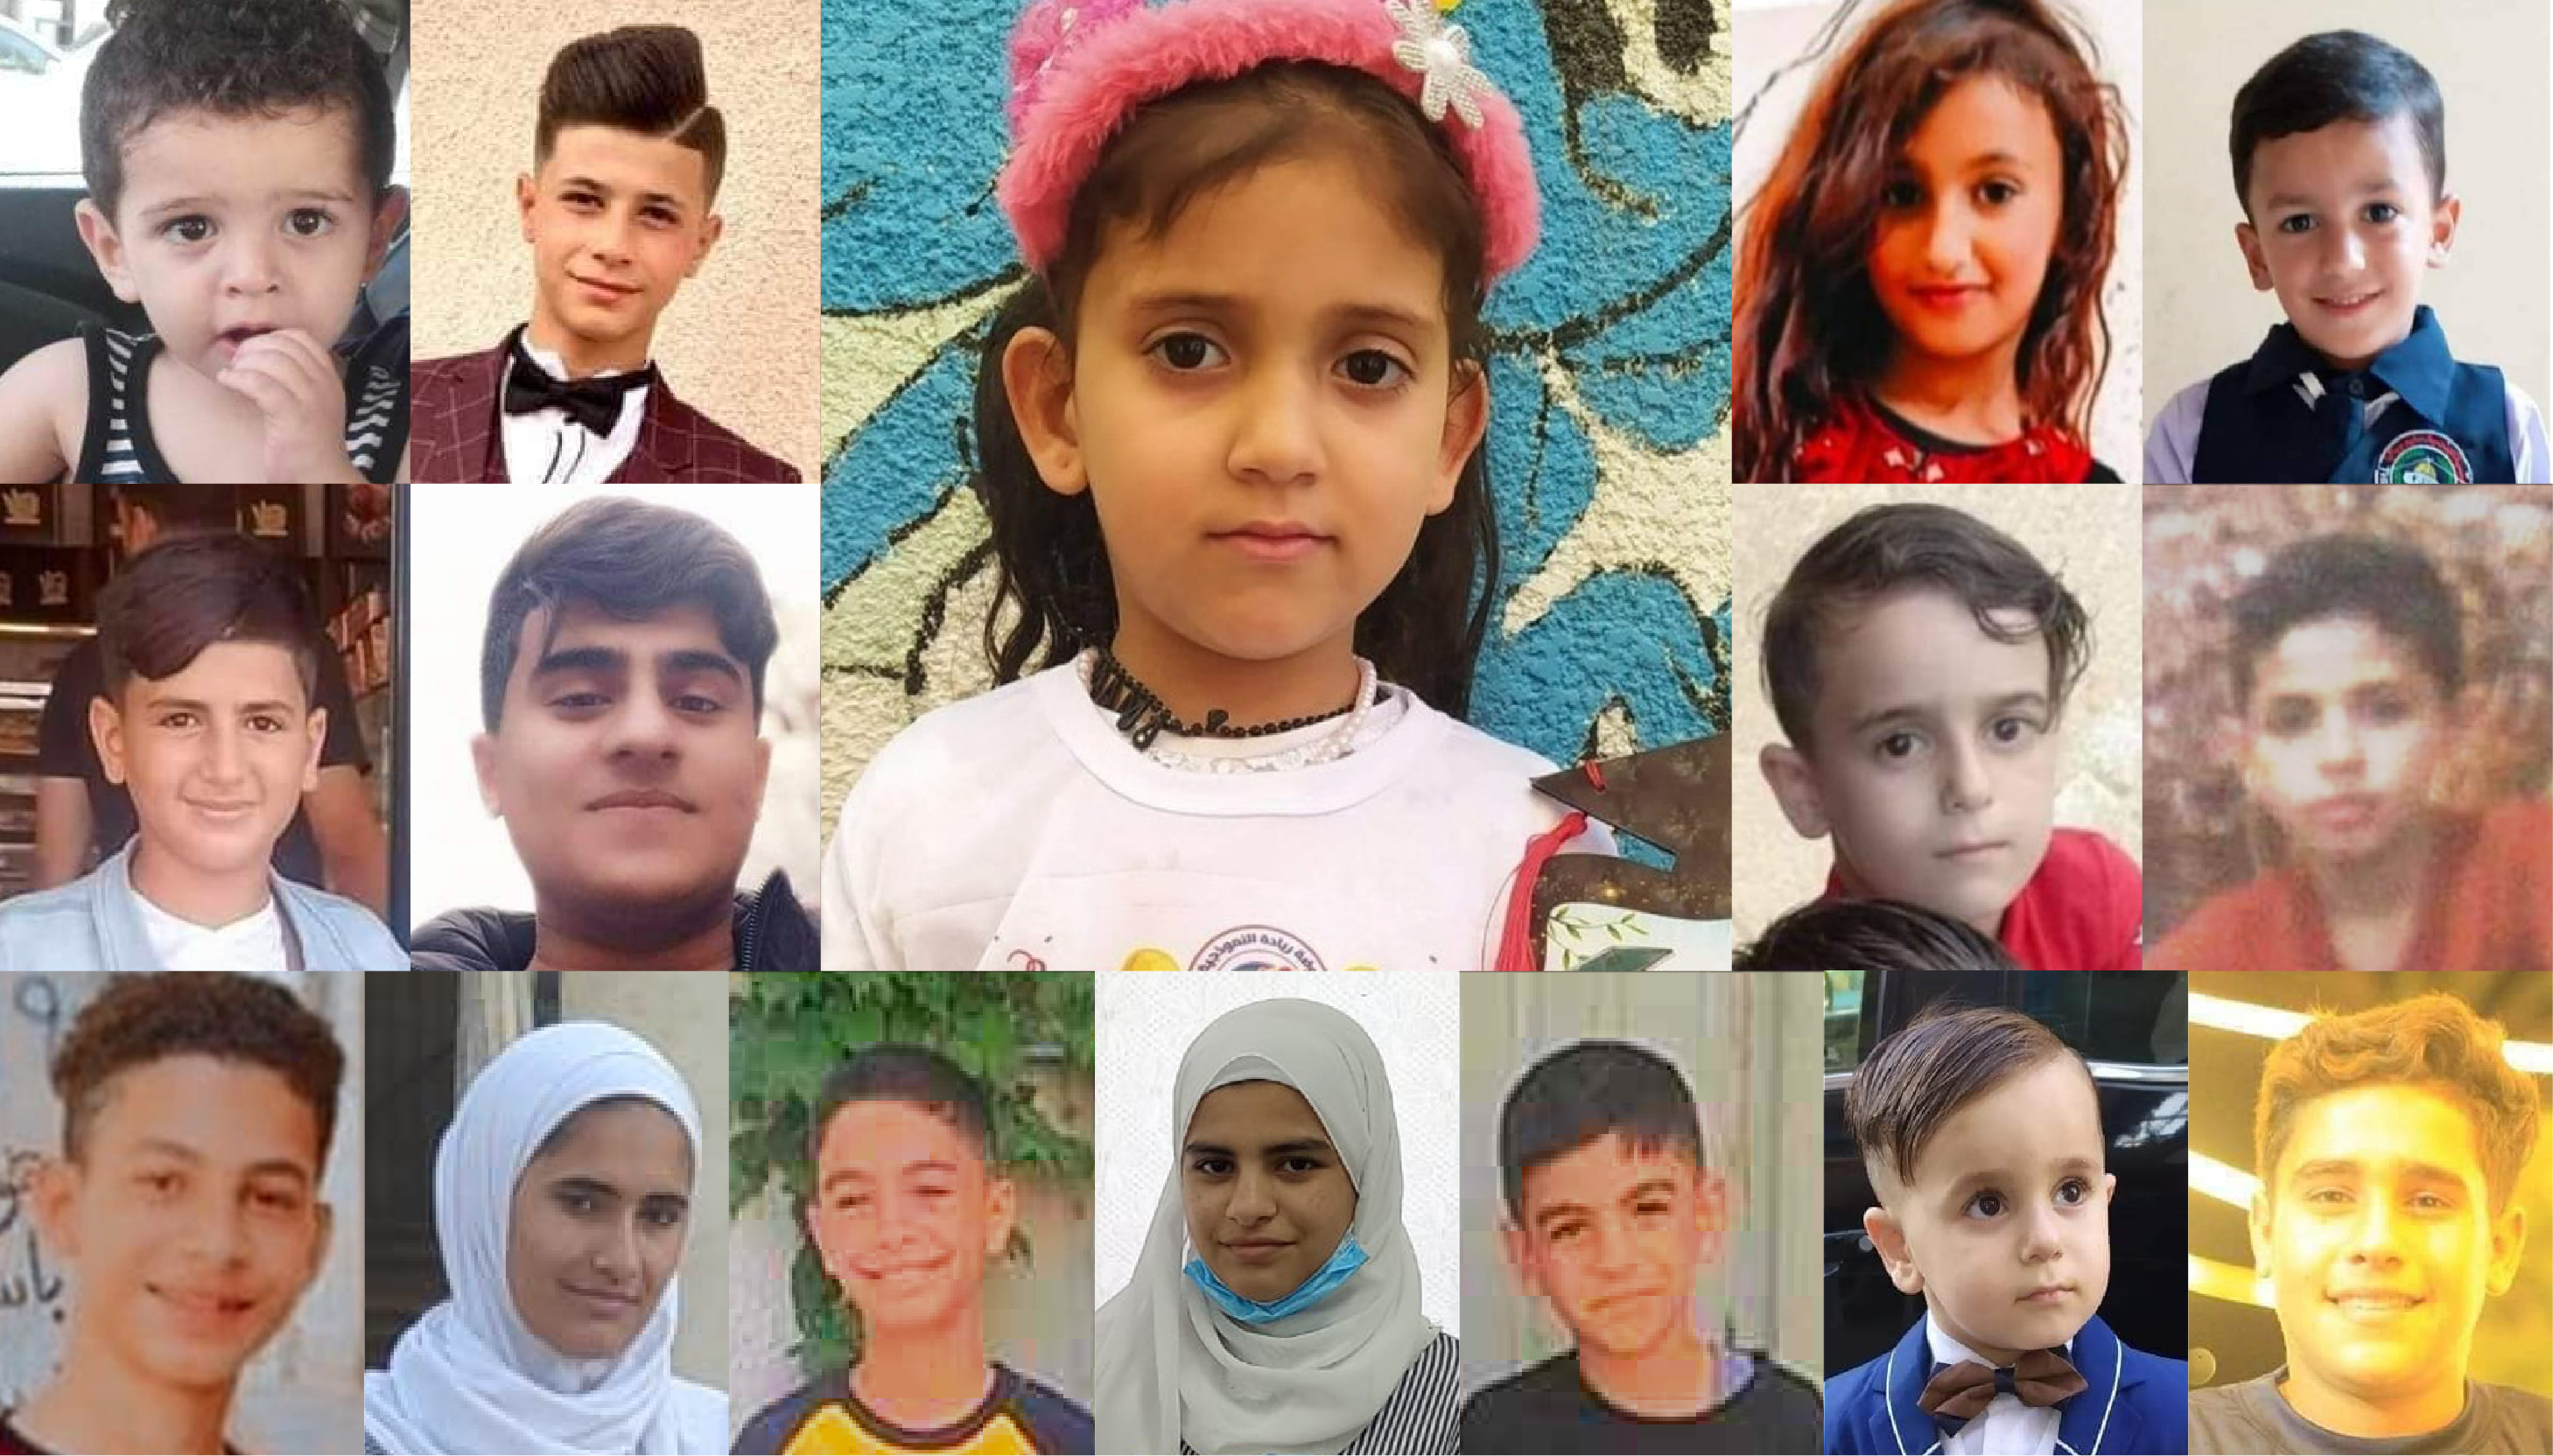 Gaza: The names and faces of the 17 Palestinian children killed in Israel's onslaught | Middle East Eye